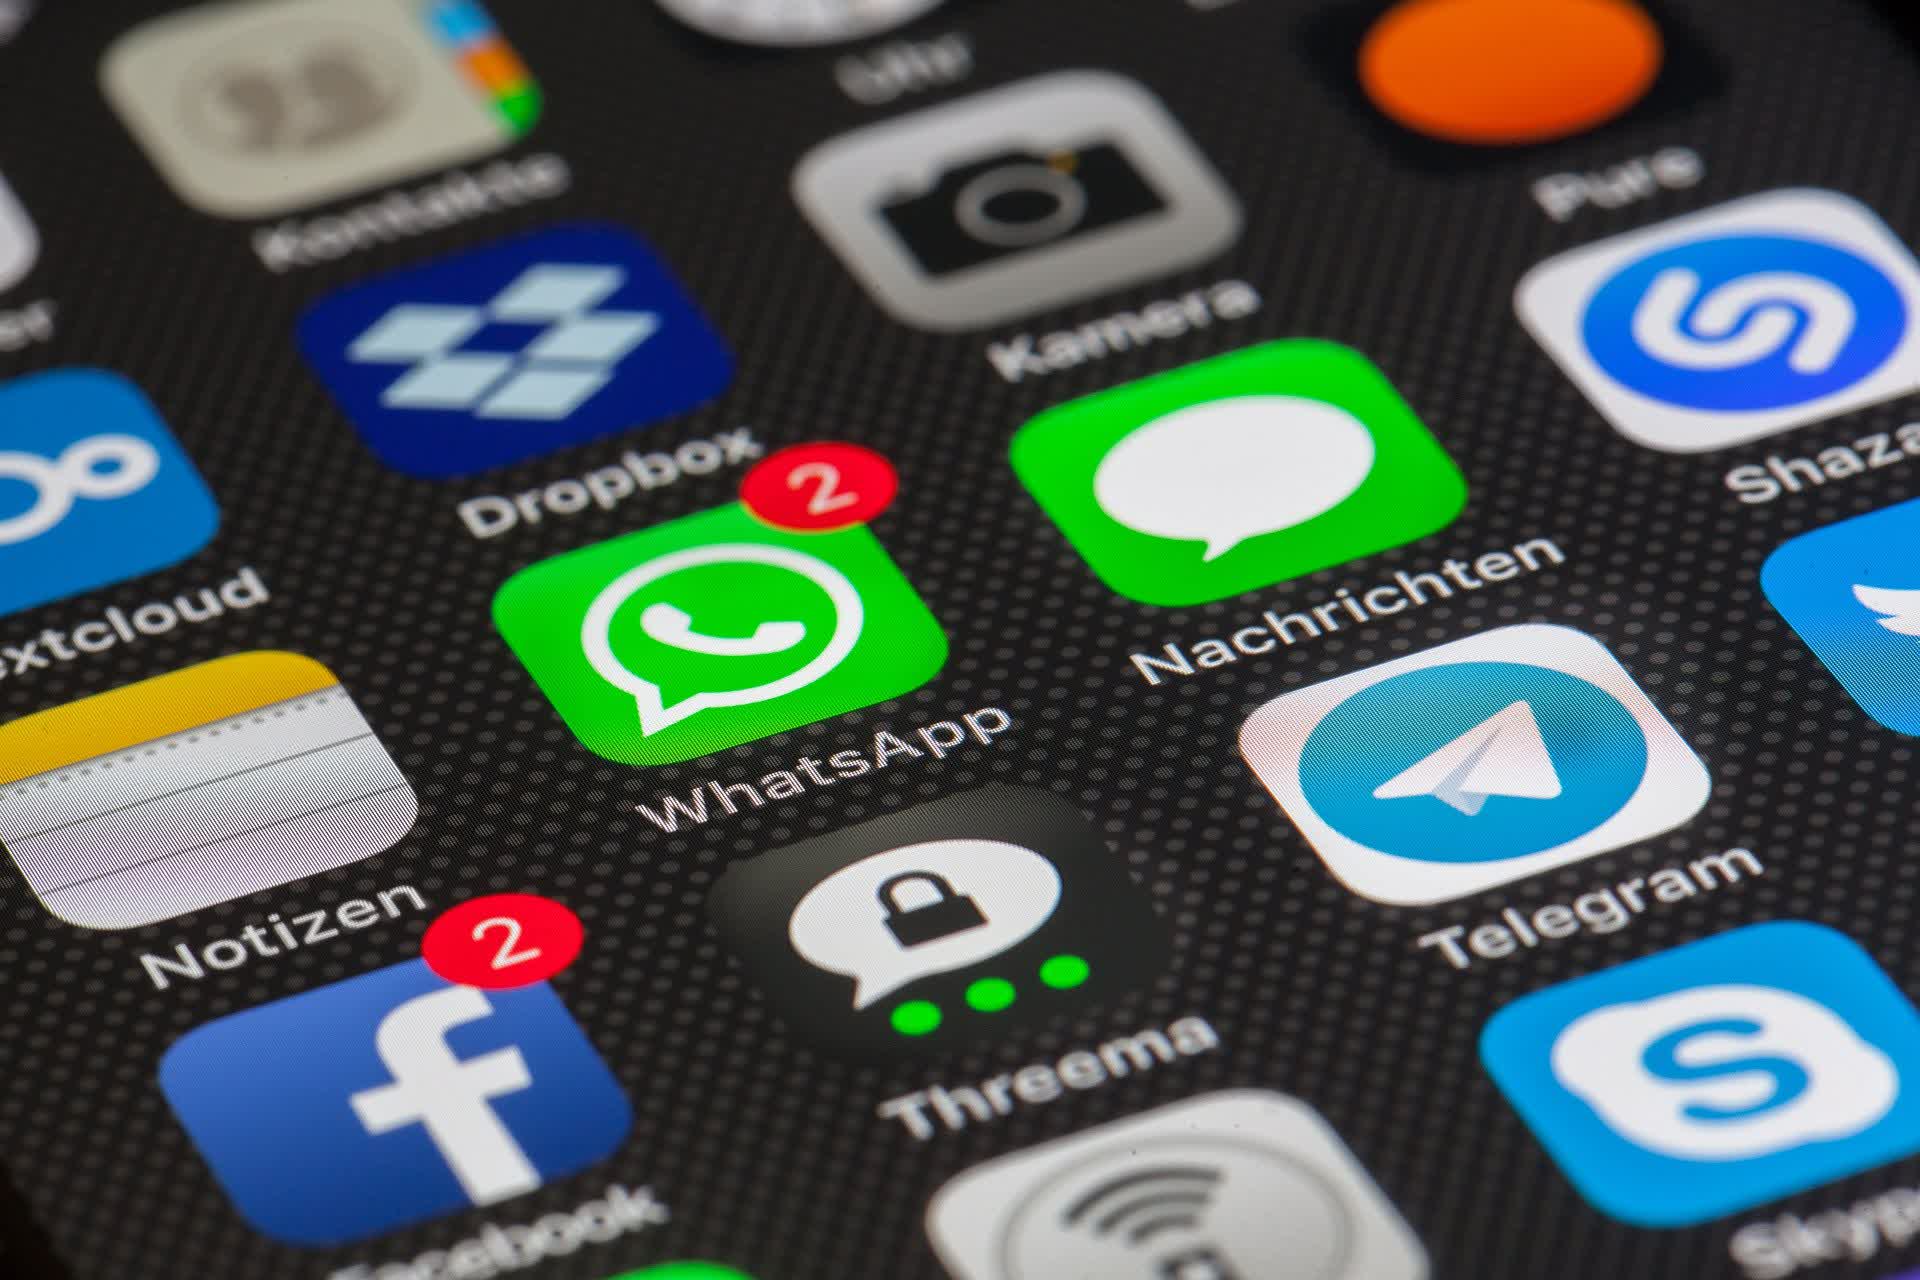 WhatsApp's end-to-end encryption closes a longstanding security loophole